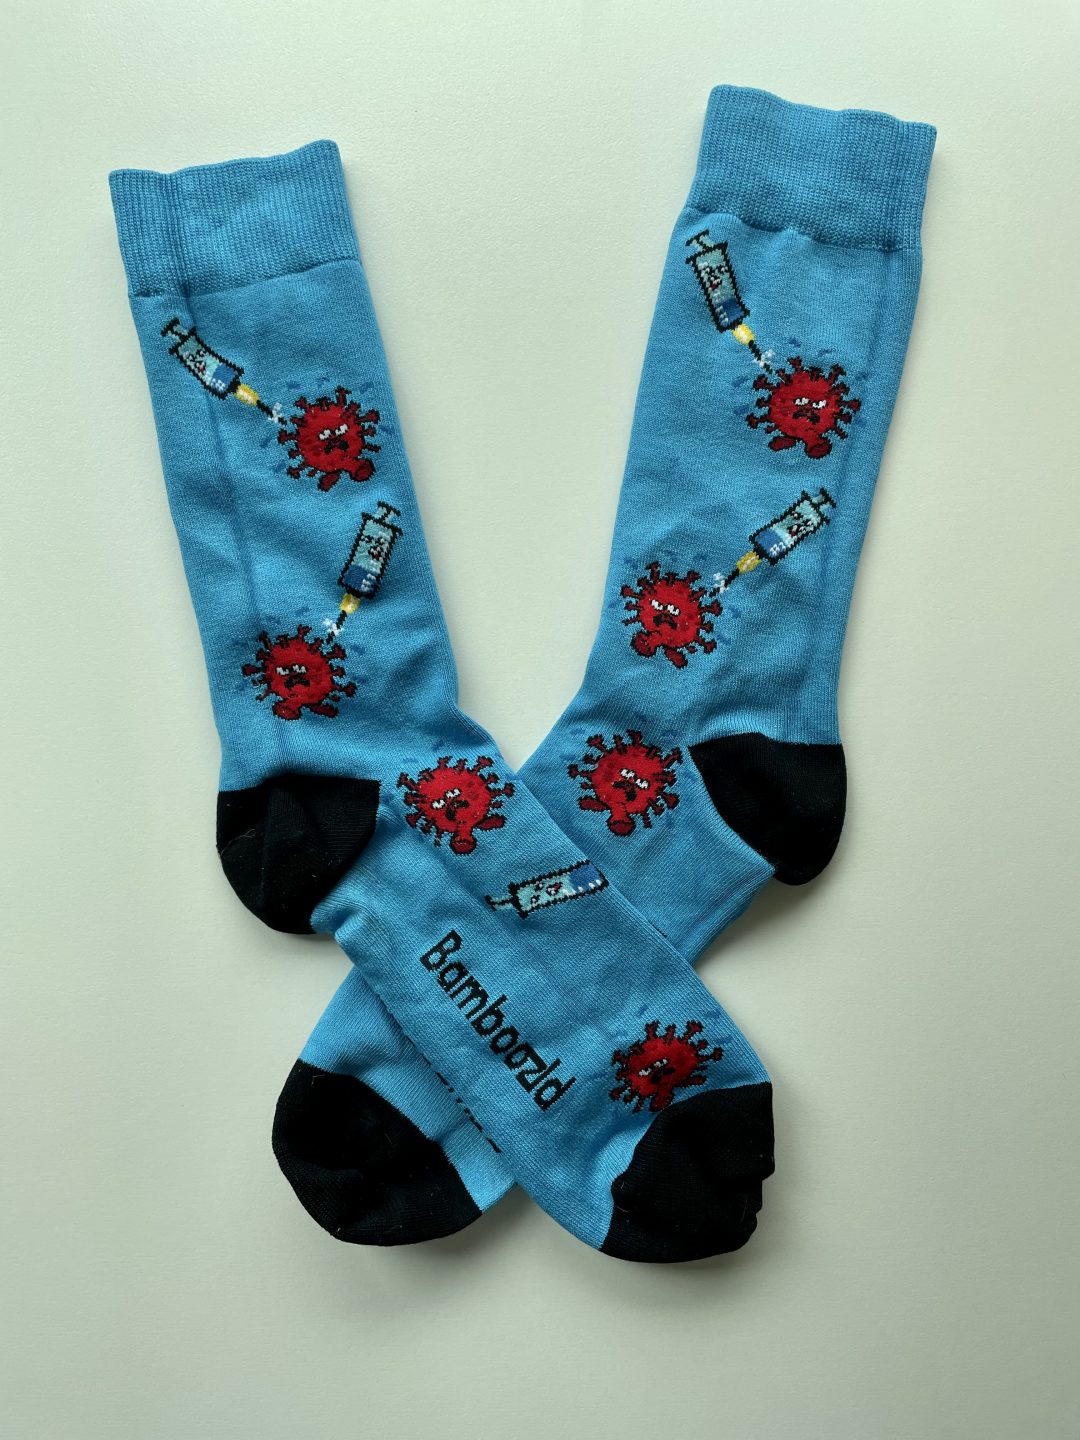 Two socks. The left is placed over the right. Both are bright blue, with black toes and heels, with repeating decoration of a red virus and a blue syringe facing towards it. 